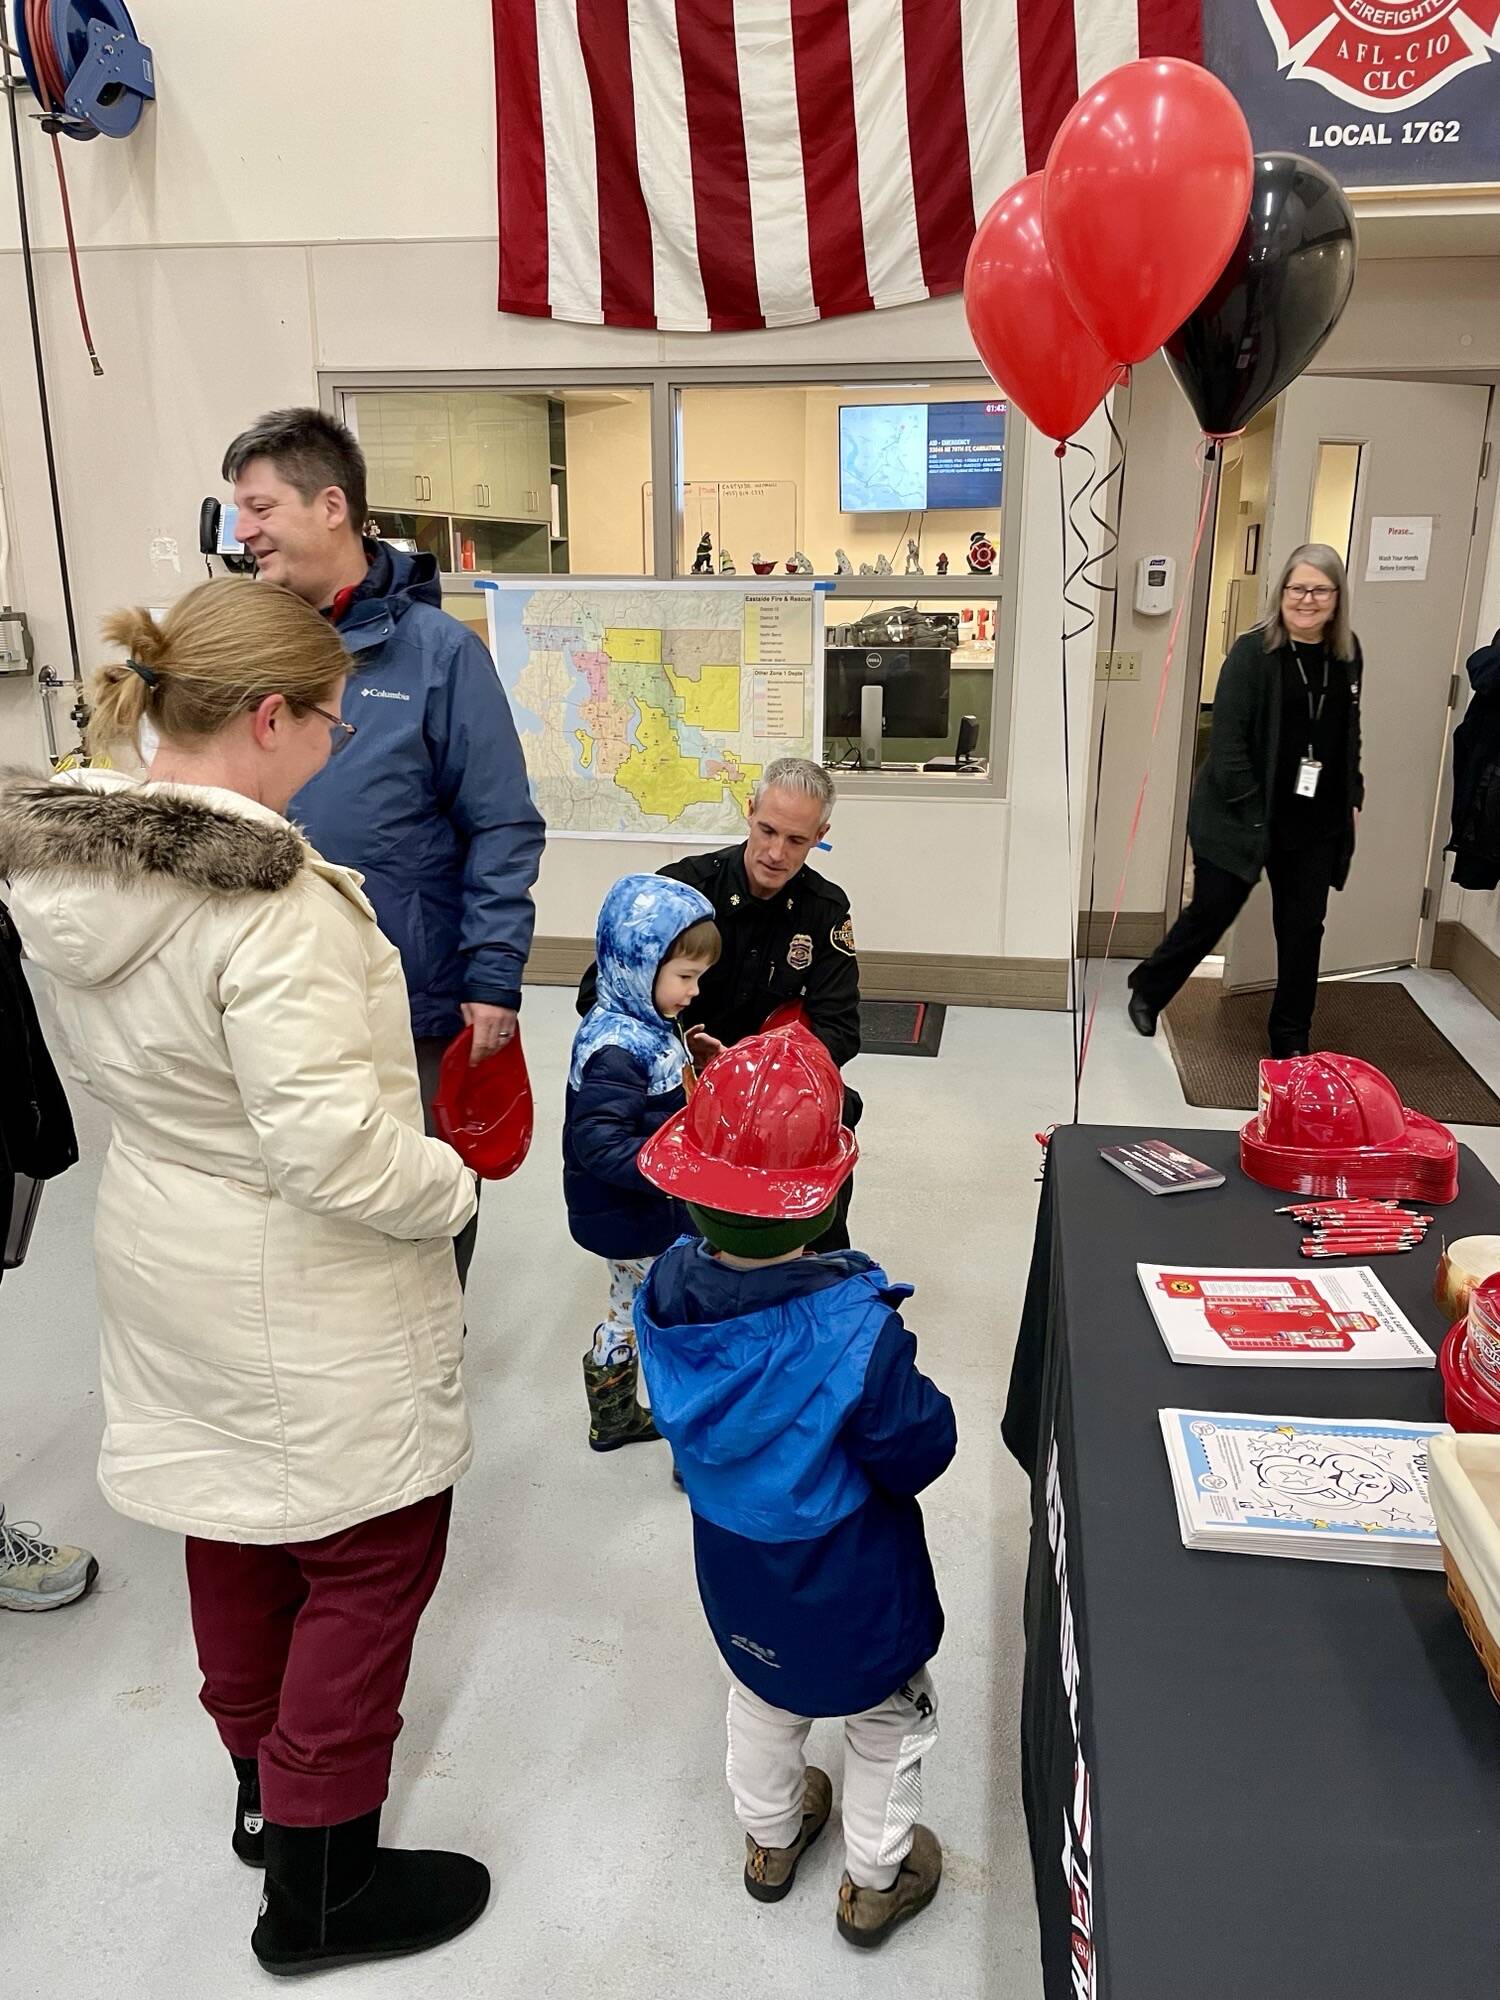 Mercer Island residents attend an open house at Fire Station 91 on Jan. 10 to meet firefighters, explore the station and learn about the city’s Jan. 1 transition to a regional fire services model with Eastside Fire & Rescue (EF&R). Photo courtesy of the city of Mercer Island